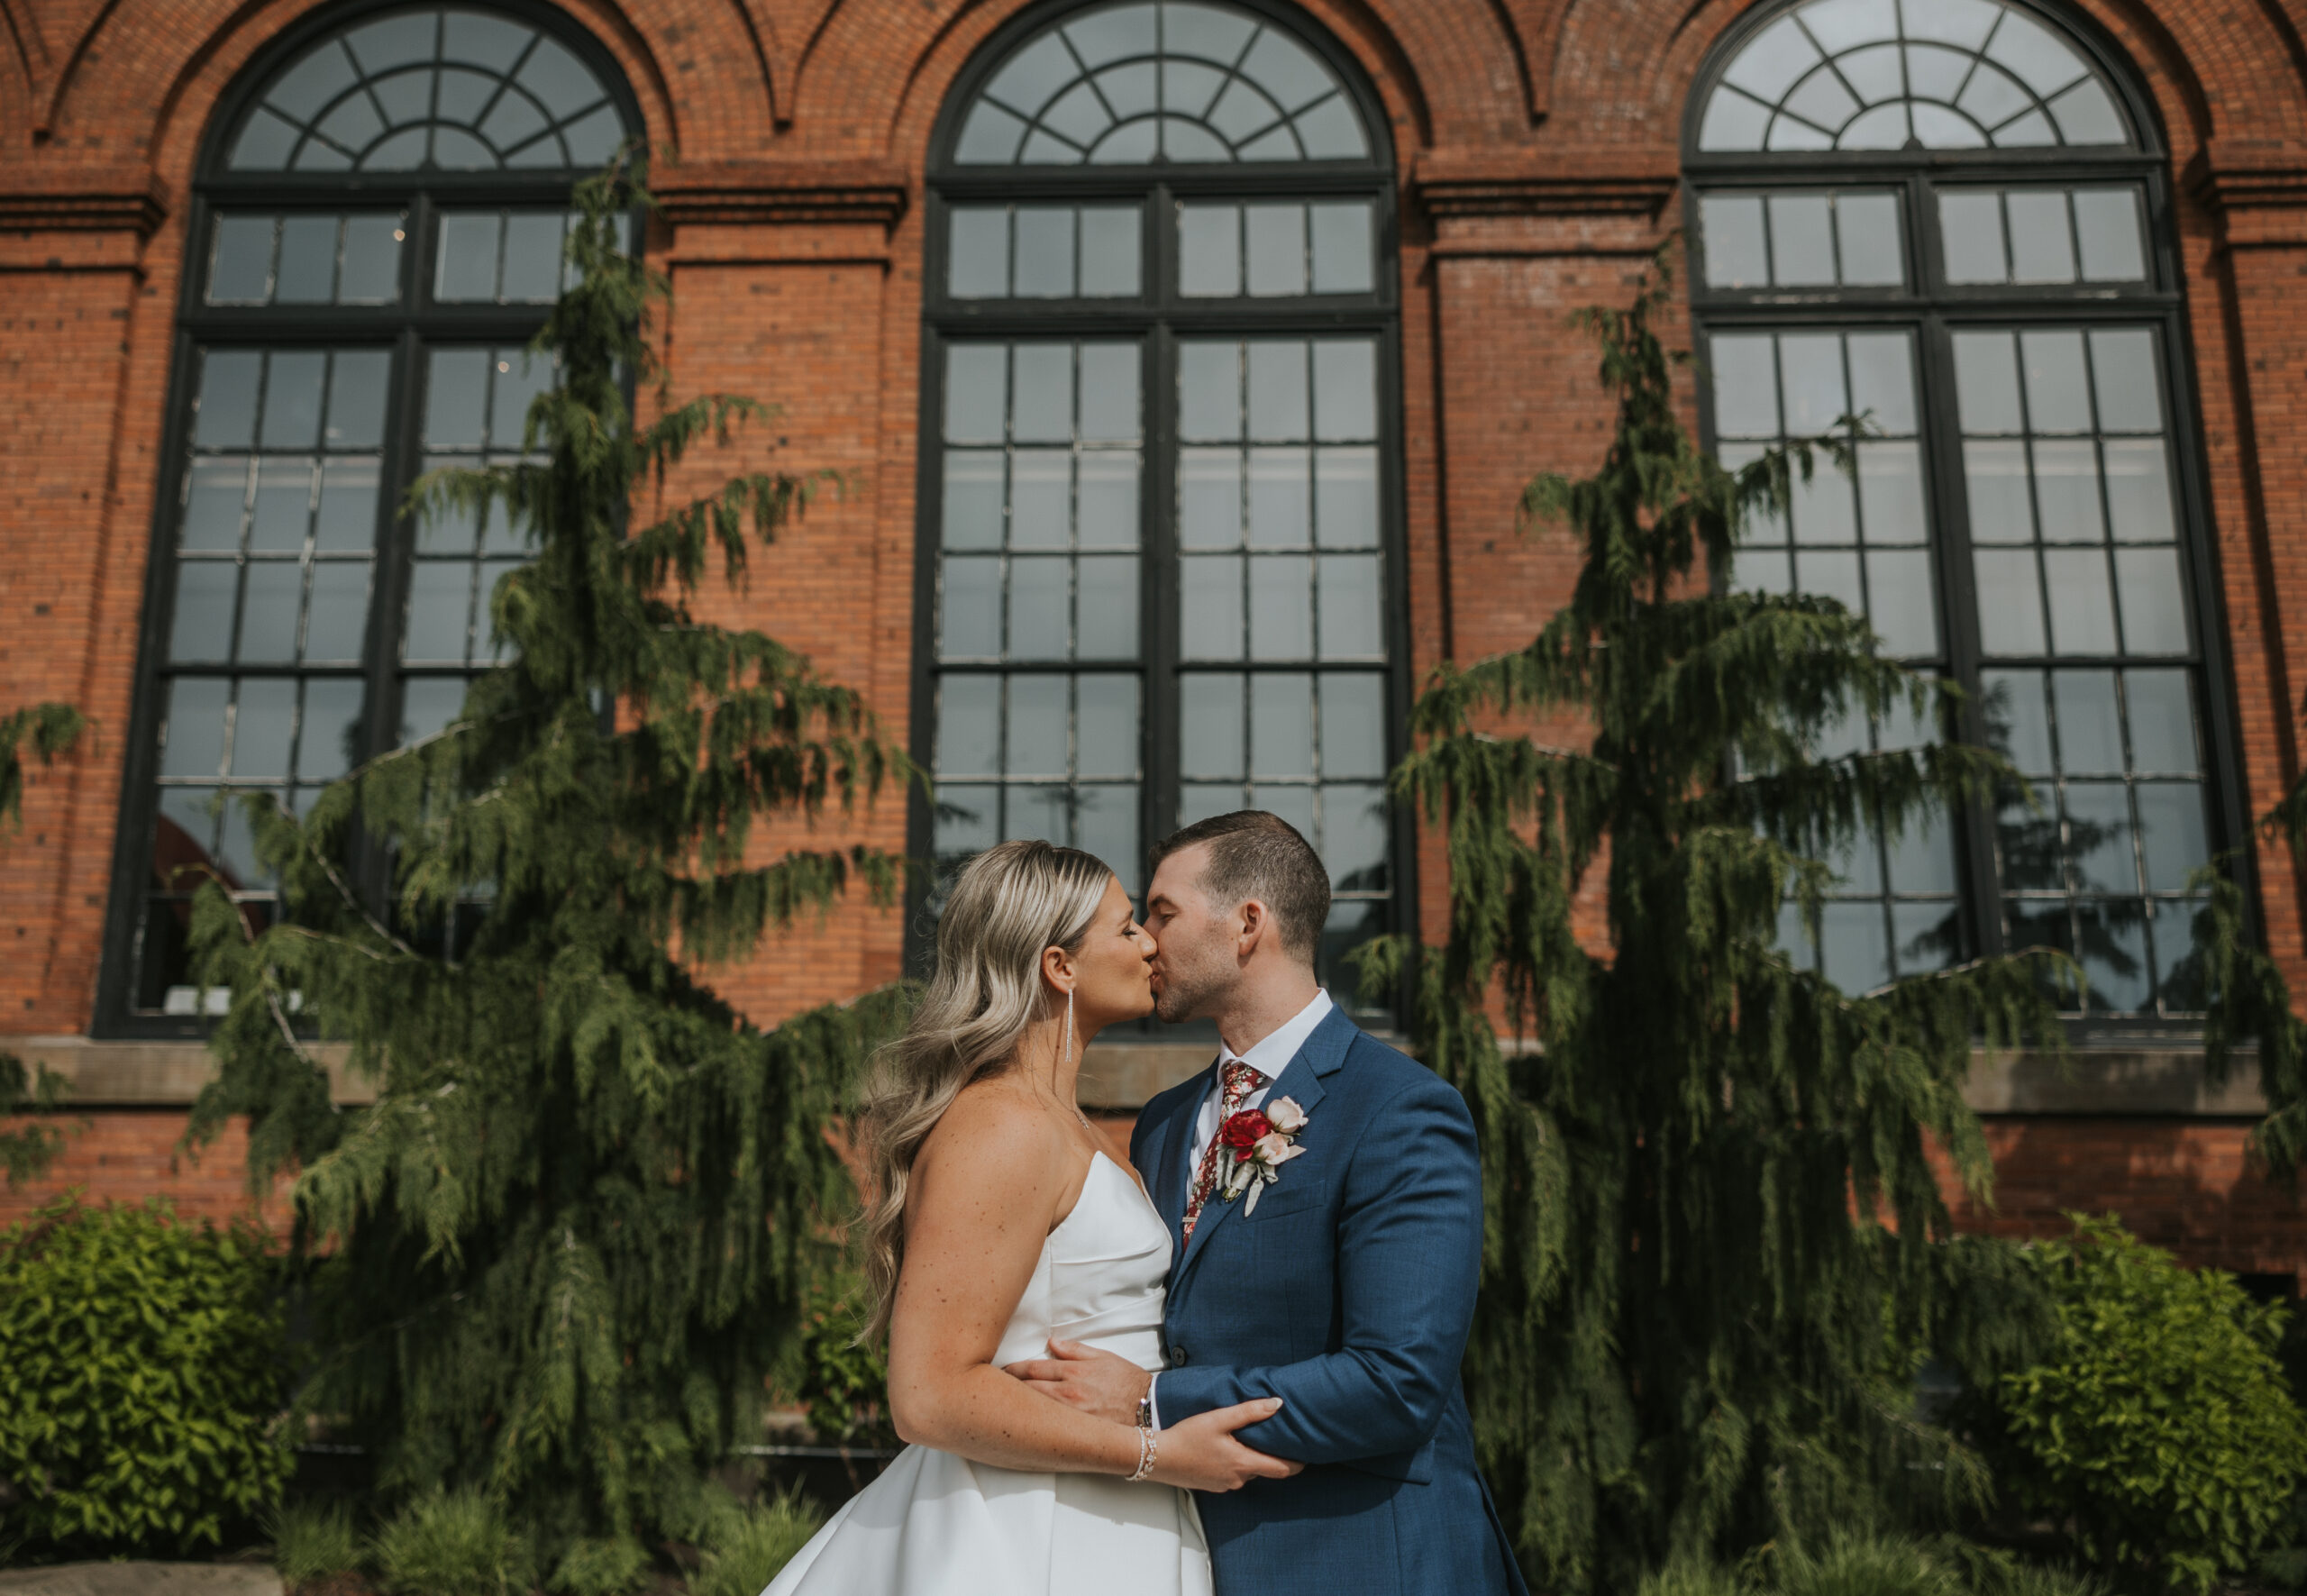 Bride and Groom kissing in front of a brick building